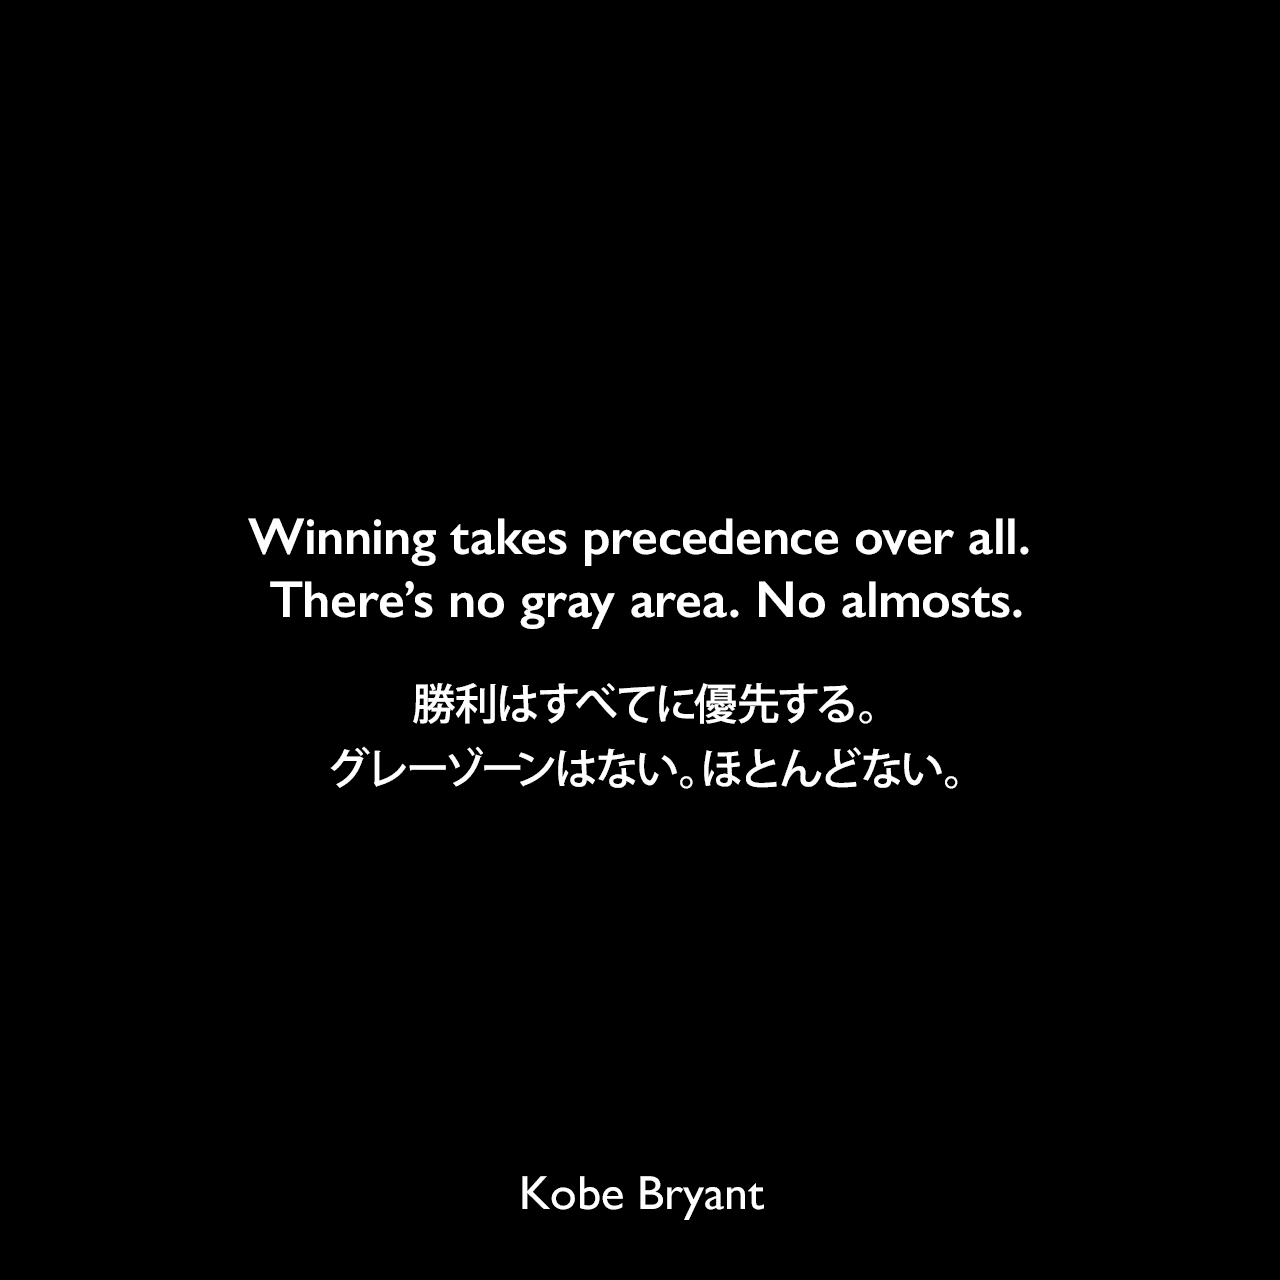 Winning takes precedence over all. There’s no gray area. No almosts.勝利はすべてに優先する。グレーゾーンはない。ほとんどない。Kobe Bryant